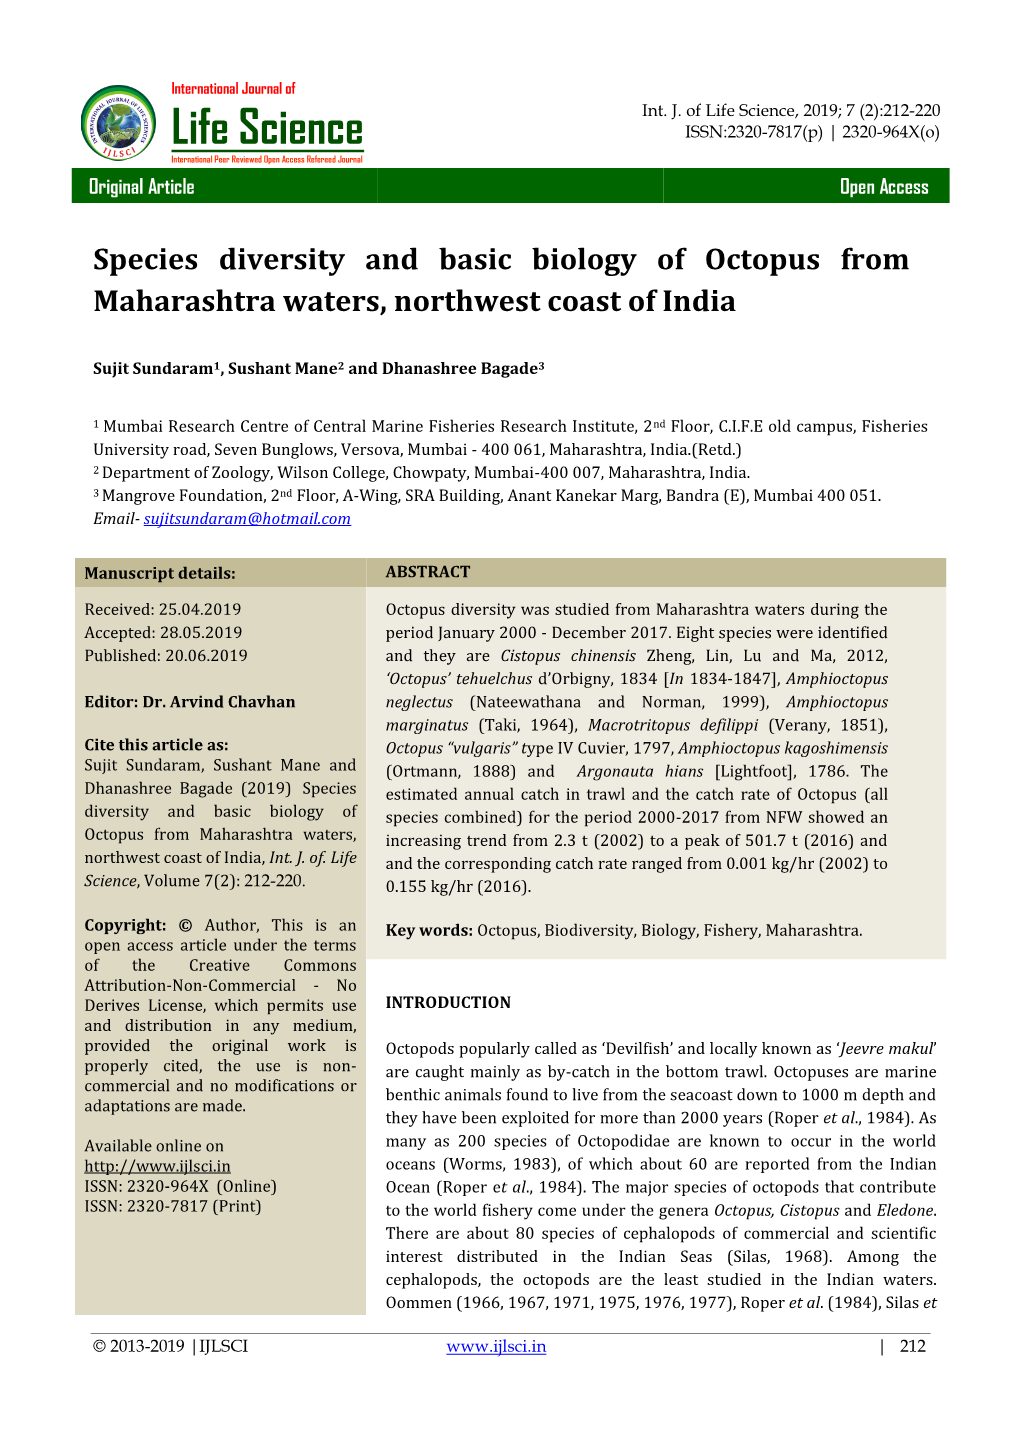 Species Diversity and Basic Biology of Octopus from Maharashtra Waters, Northwest Coast of India